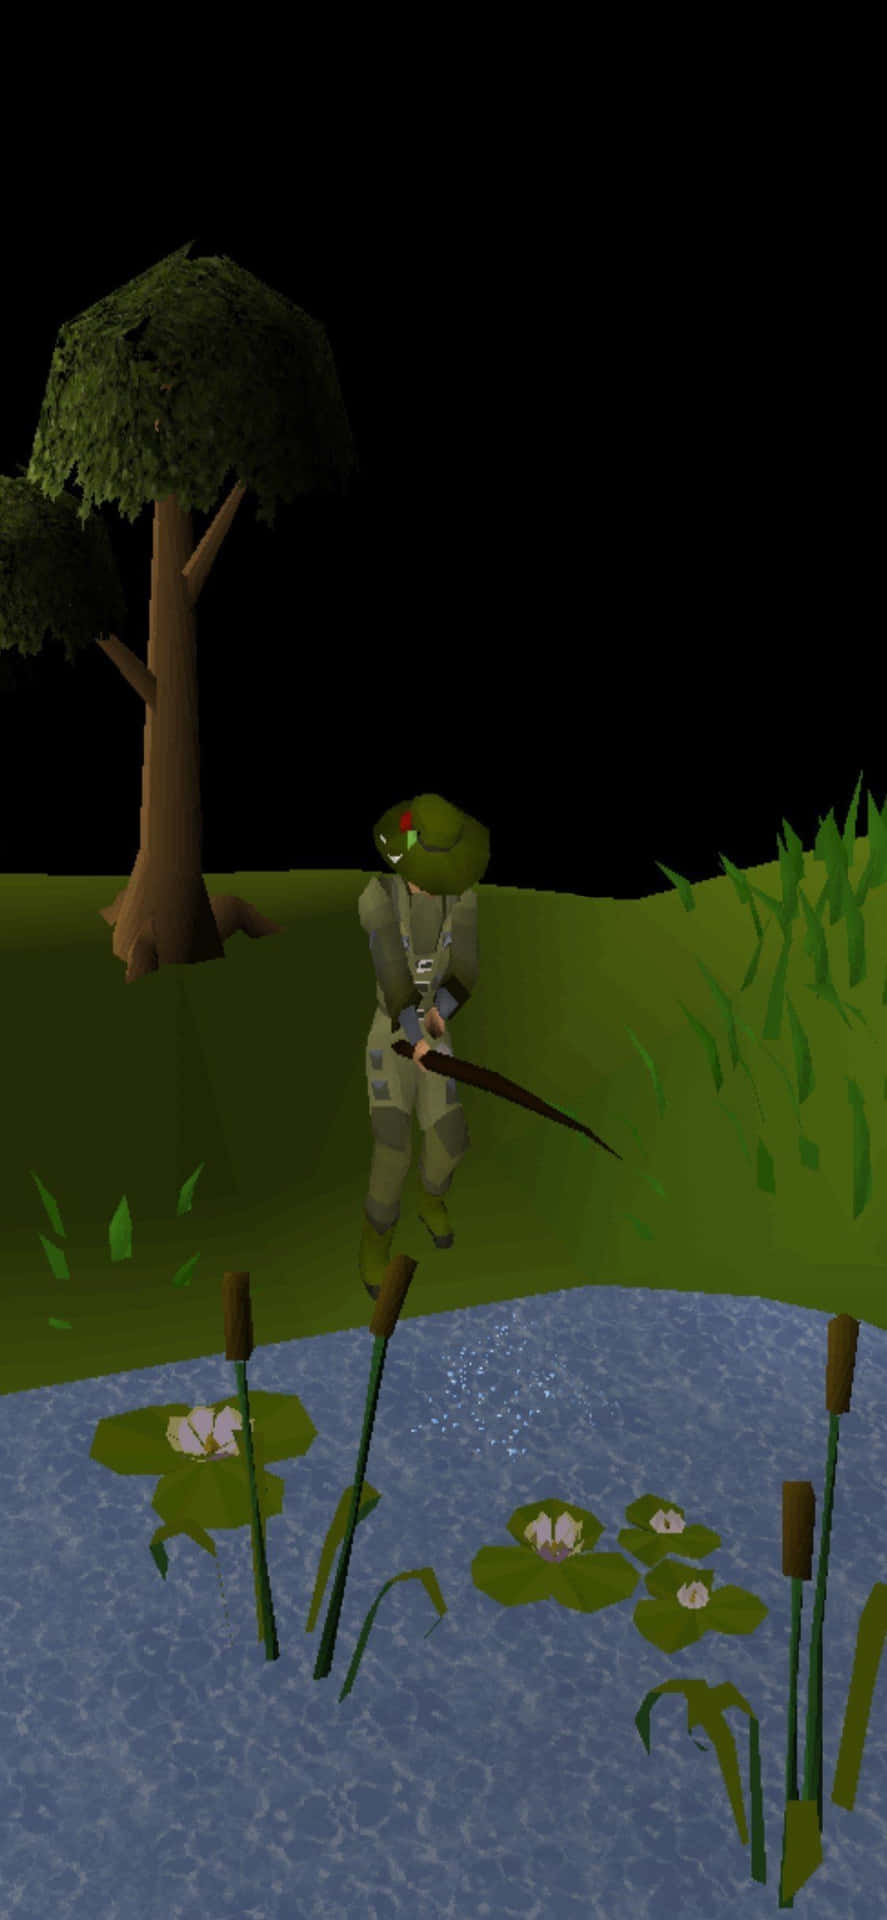 A Man Is Fishing In A Pond